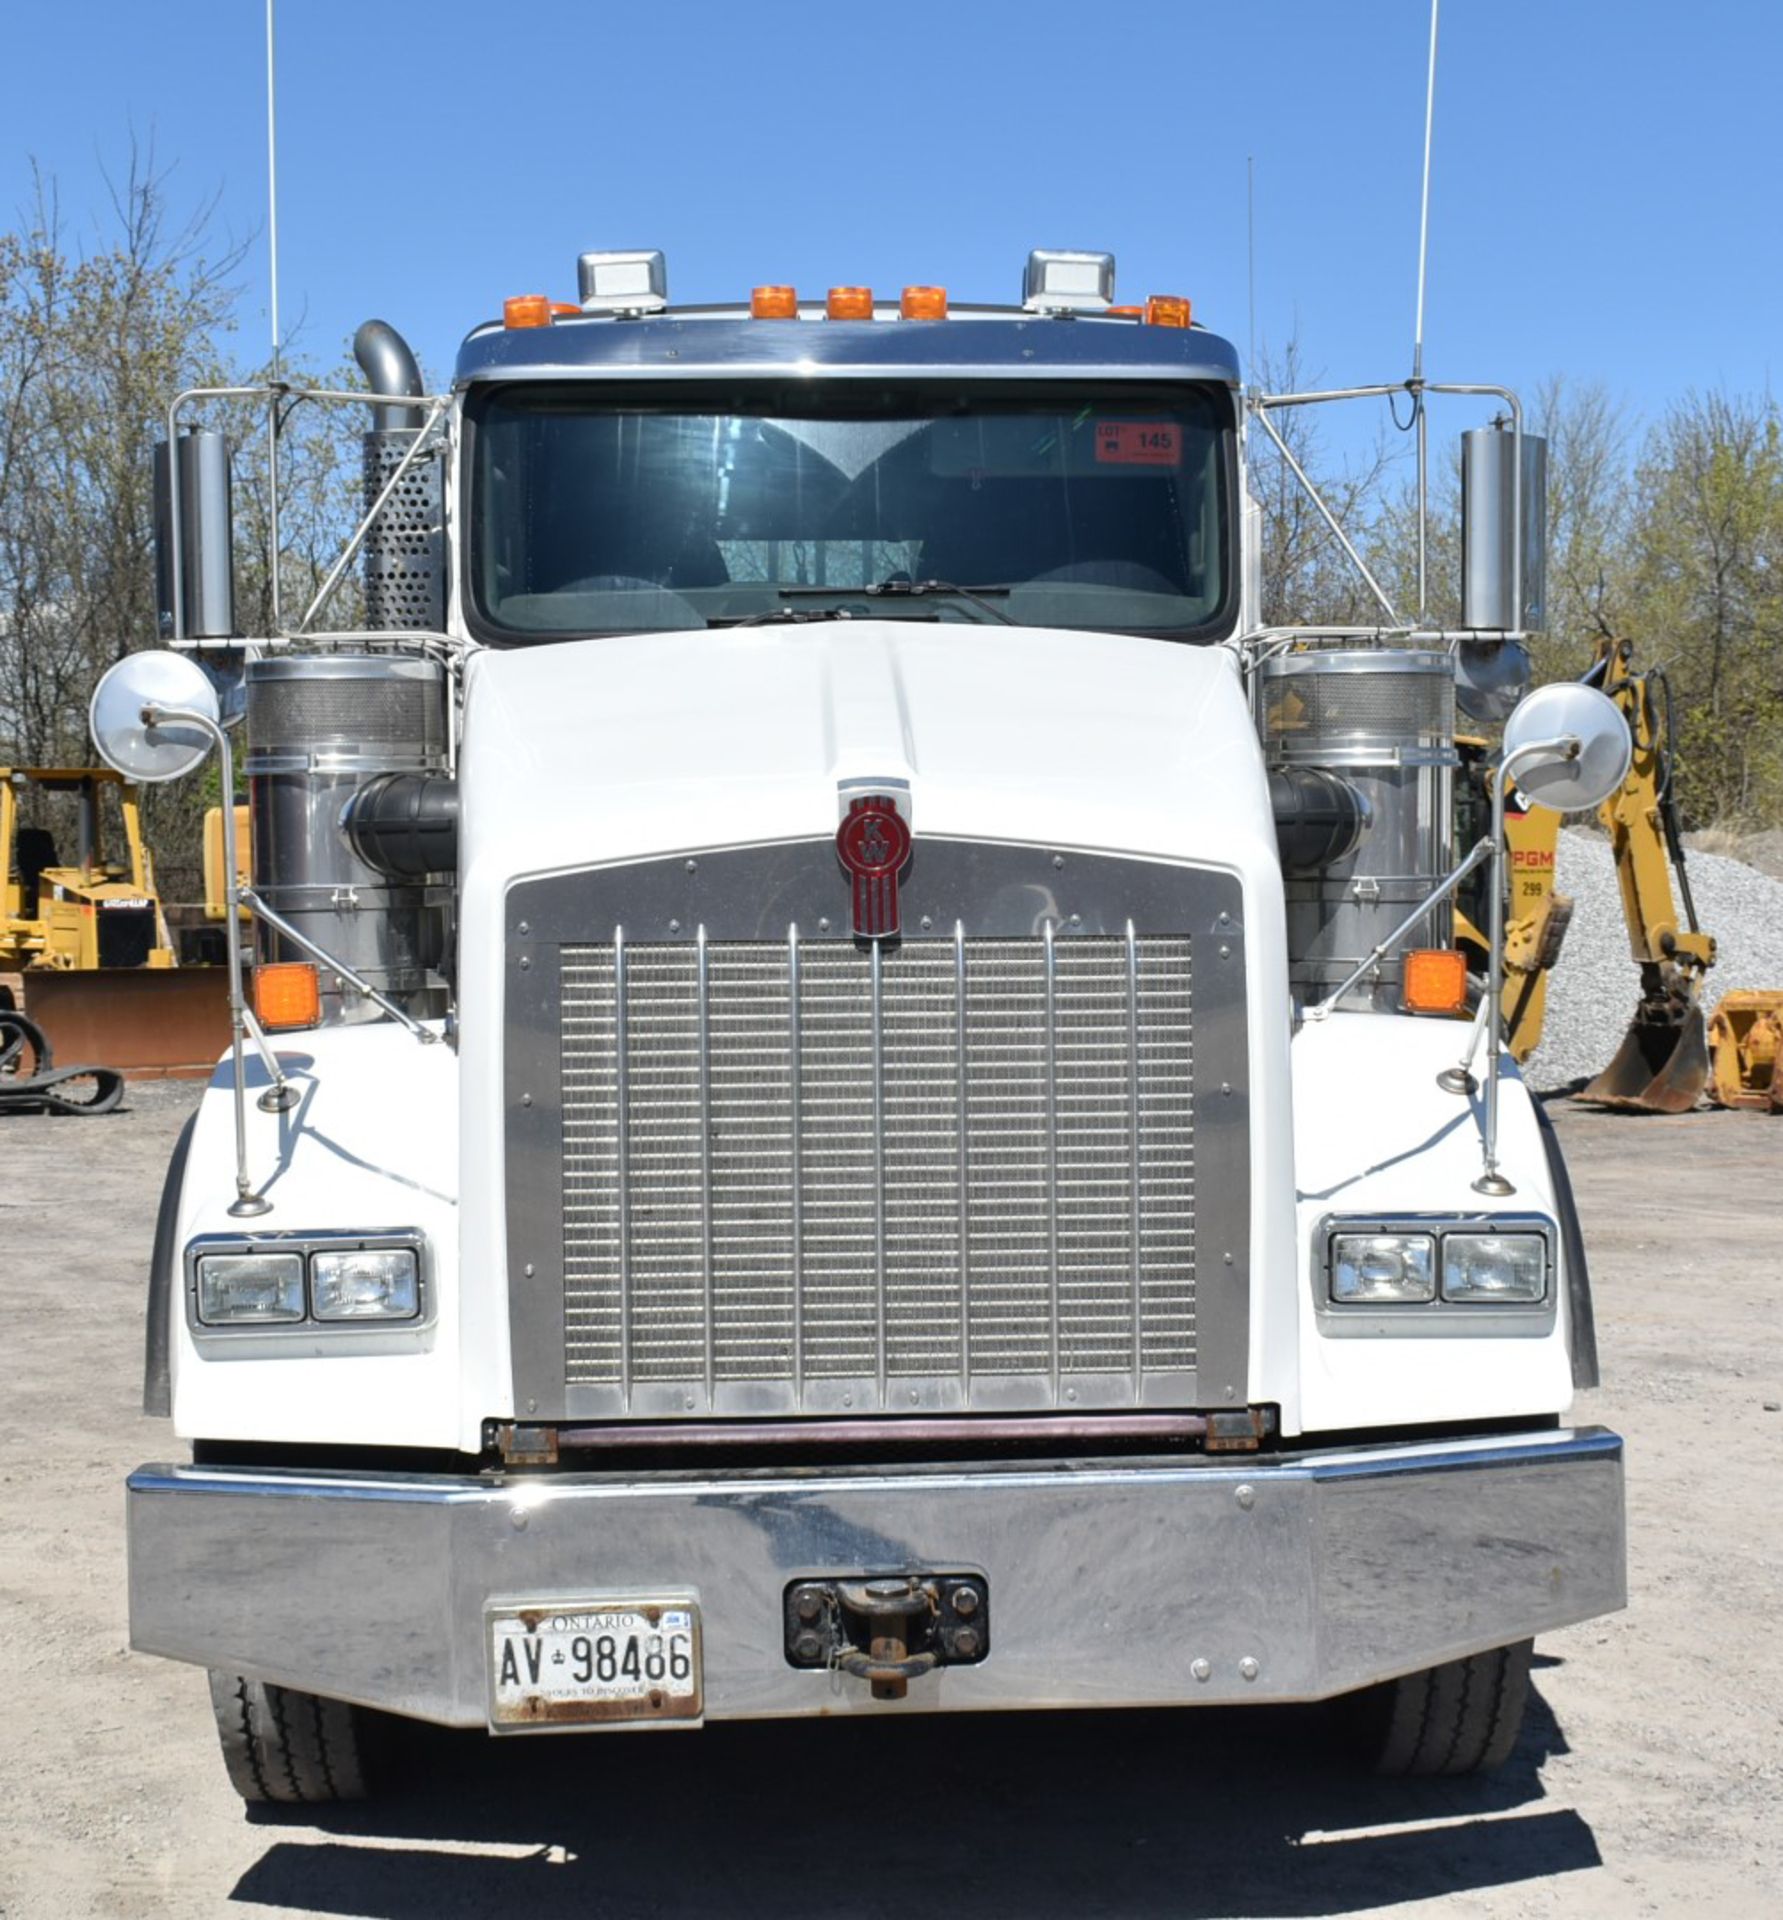 KENWORTH (2018) T800 TRI-DRIVE SEMI-TRACTOR TRUCK WITH DAY CAB, CUMMINS ISX-565 DIESEL ENGINE, - Image 6 of 16